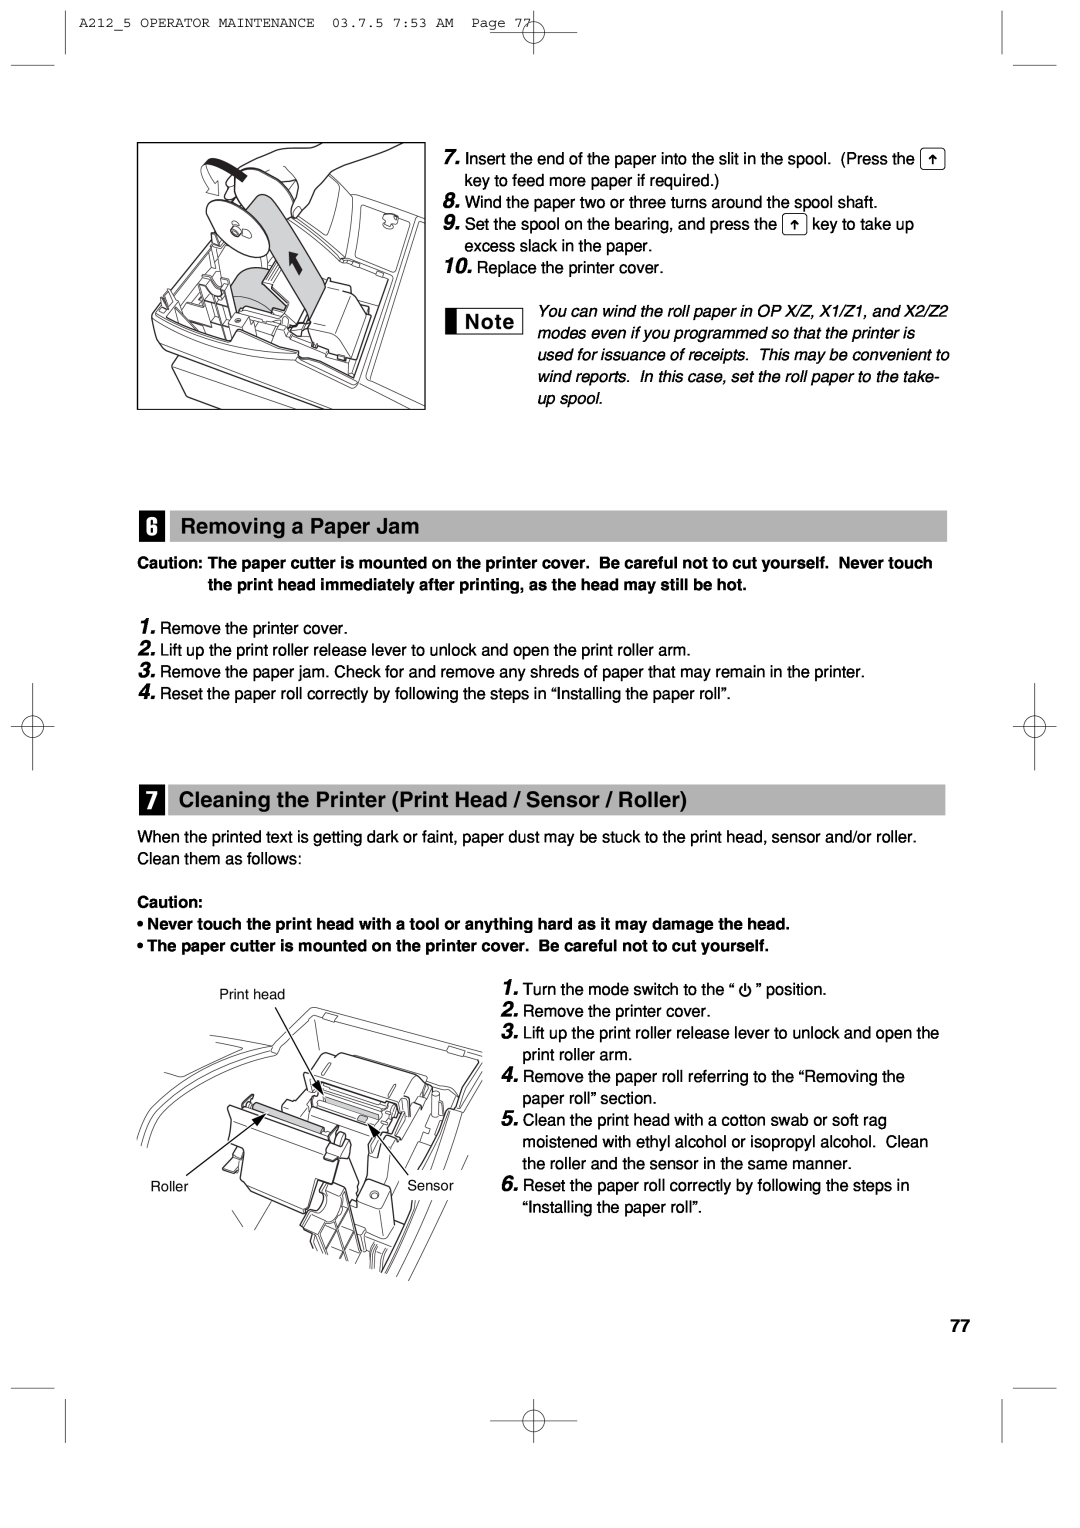 Sharp XE-A212 instruction manual Removing a Paper Jam, Cleaning the Printer Print Head / Sensor / Roller, Print head 